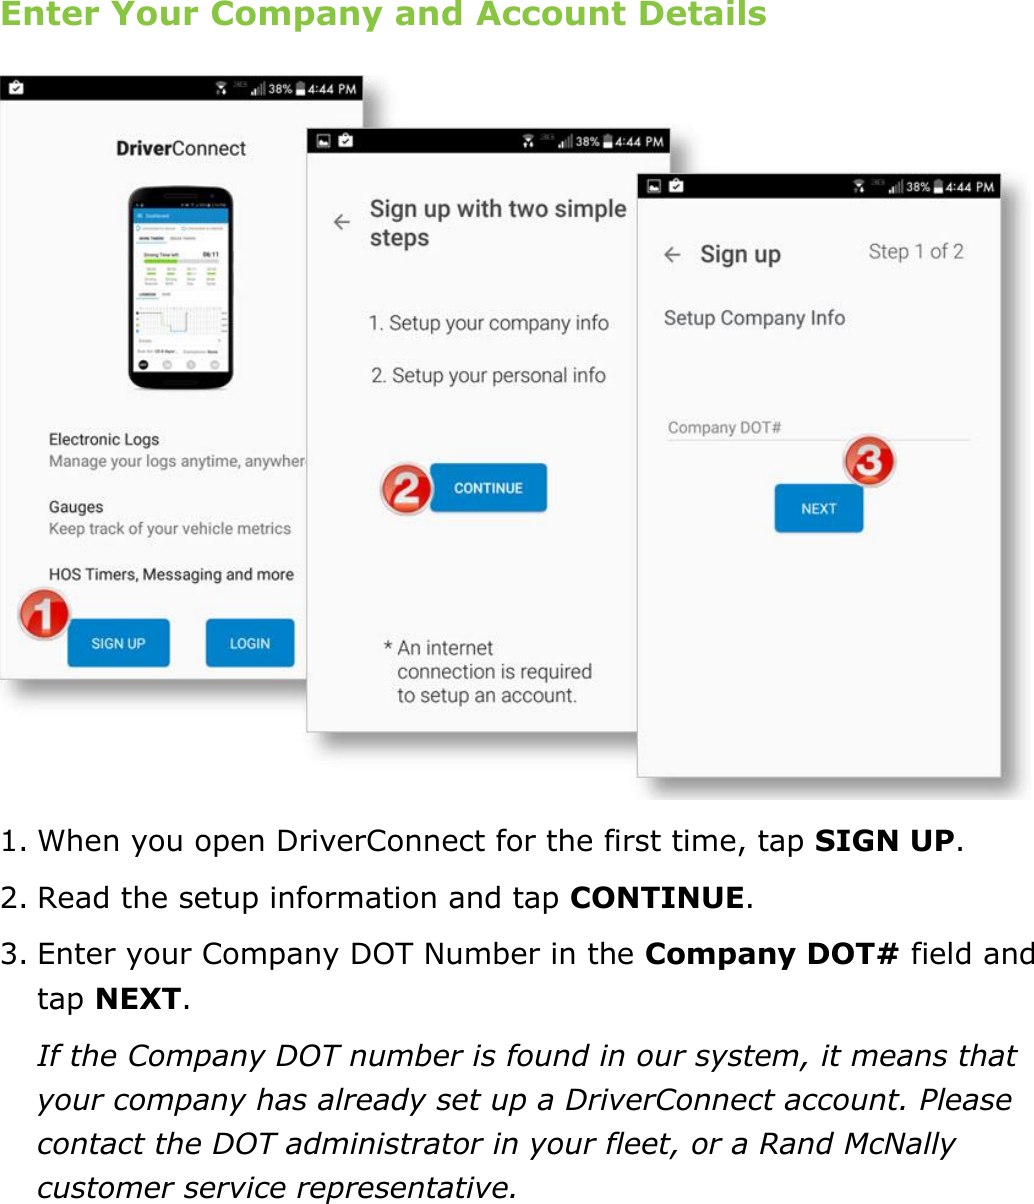 Set My Duty Status DriverConnect User Guide  10 © 2017, Rand McNally, Inc. Enter Your Company and Account Details  1. When you open DriverConnect for the first time, tap SIGN UP.  2. Read the setup information and tap CONTINUE. 3. Enter your Company DOT Number in the Company DOT# field and tap NEXT. If the Company DOT number is found in our system, it means that your company has already set up a DriverConnect account. Please contact the DOT administrator in your fleet, or a Rand McNally customer service representative.    